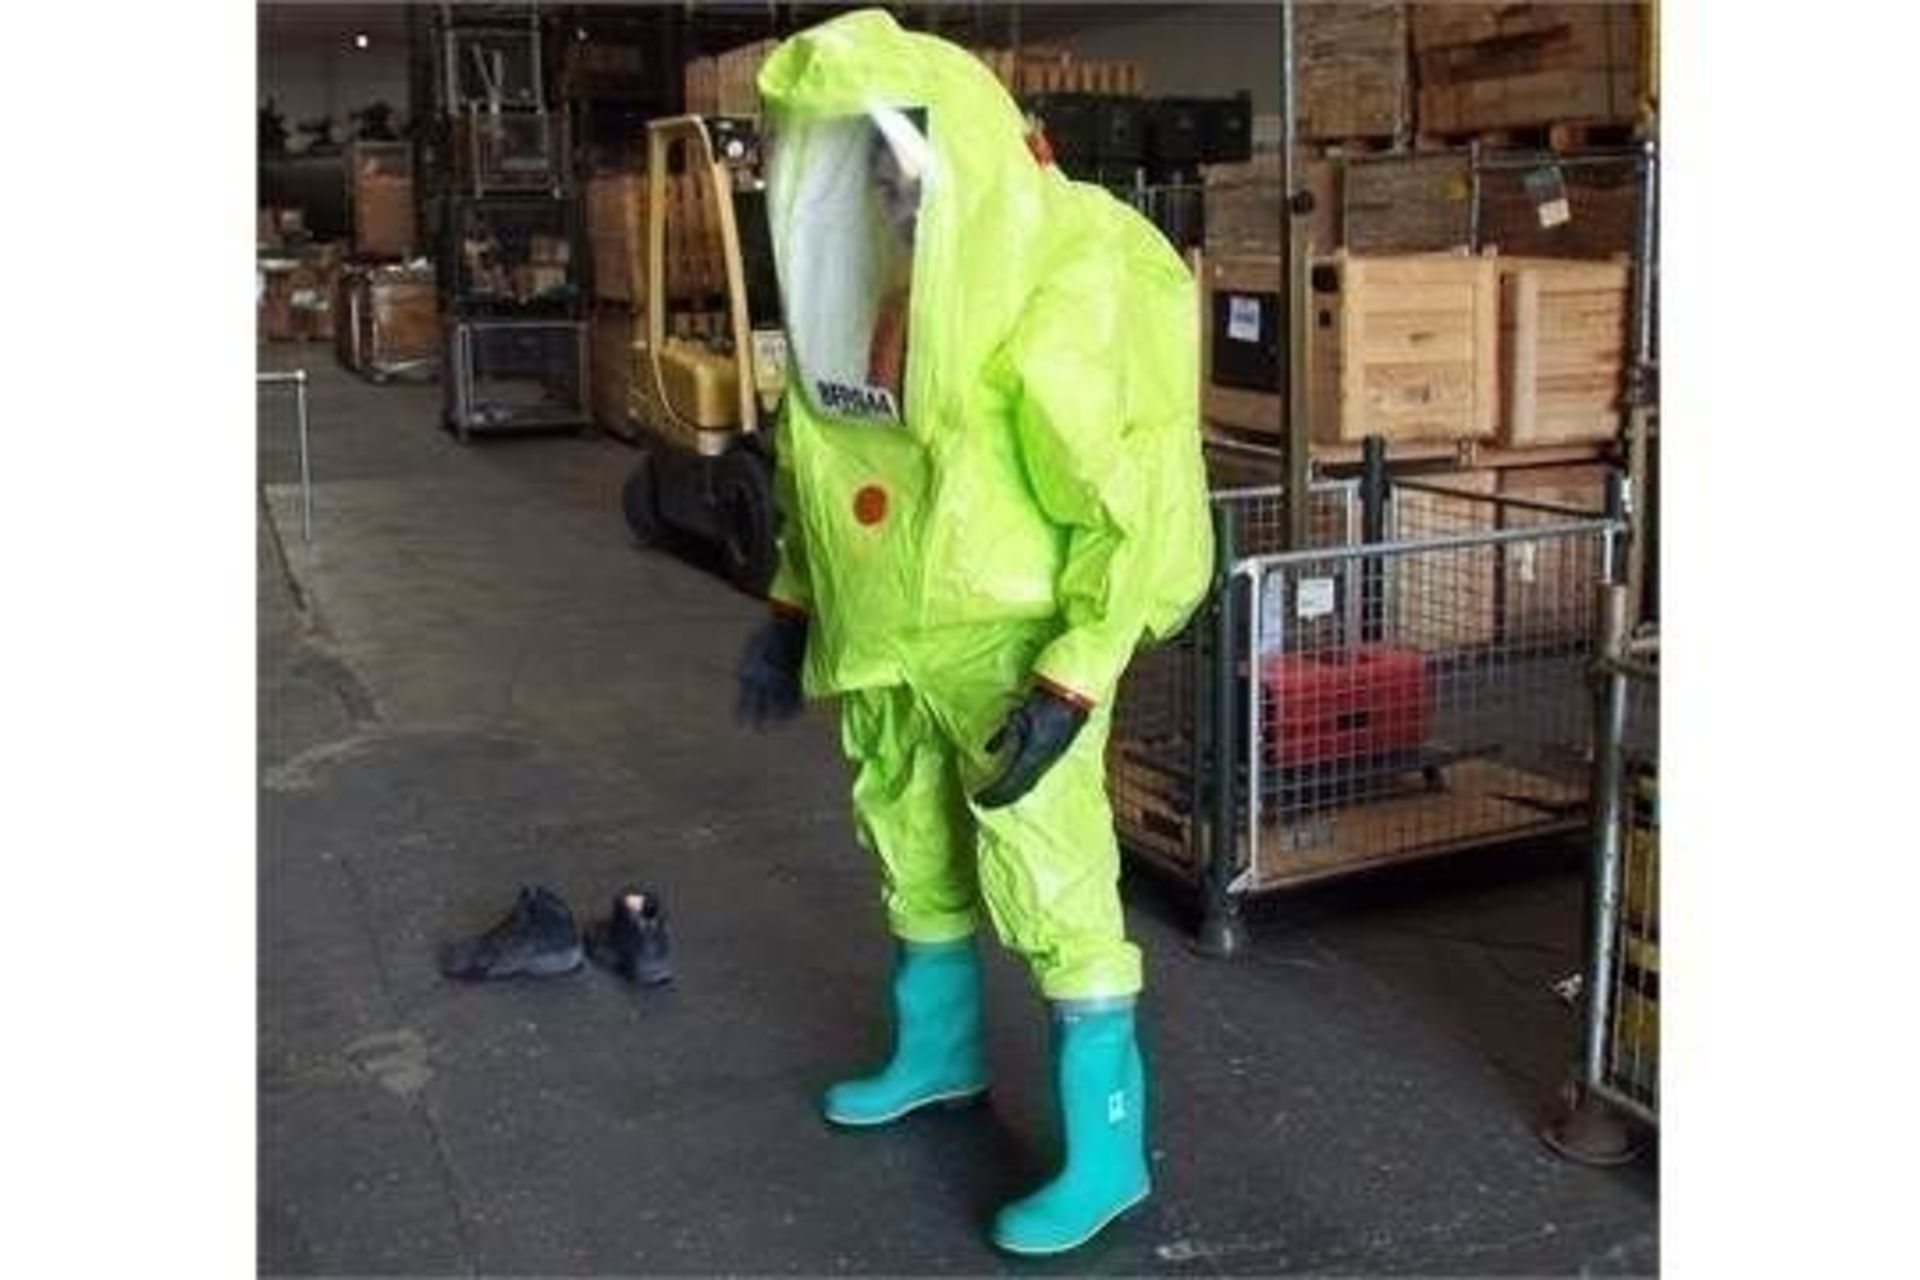 10x UNISSUED RESPIREX TYCHEM TK GAS-TIGHT HAZMAT SUIT TYPE 1A WITH ATTACHED BOOTS AND GLOVES - Image 2 of 11